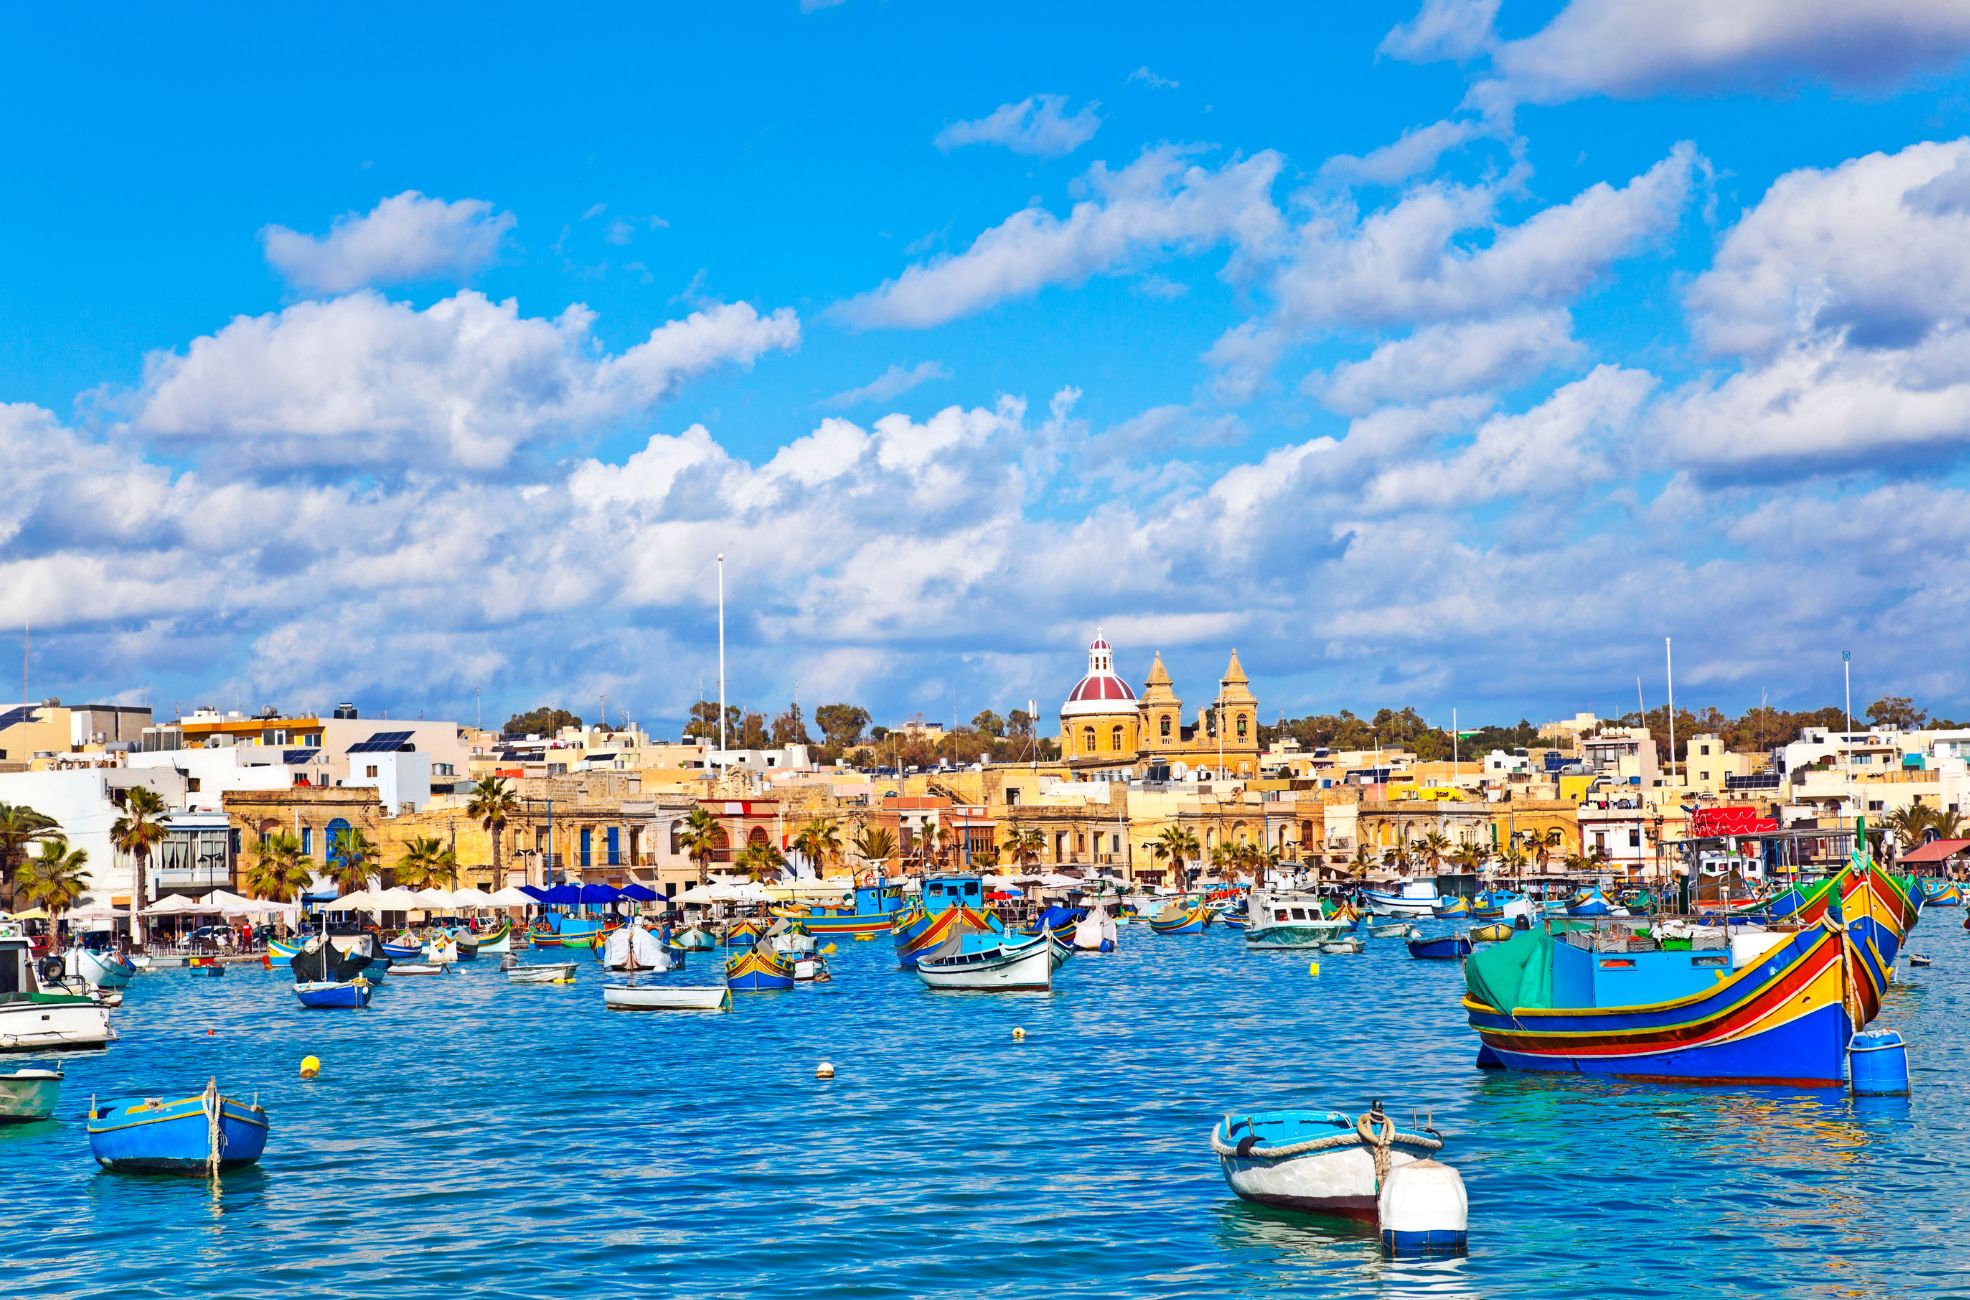 Sunny Sky With Boats On Water In Malta